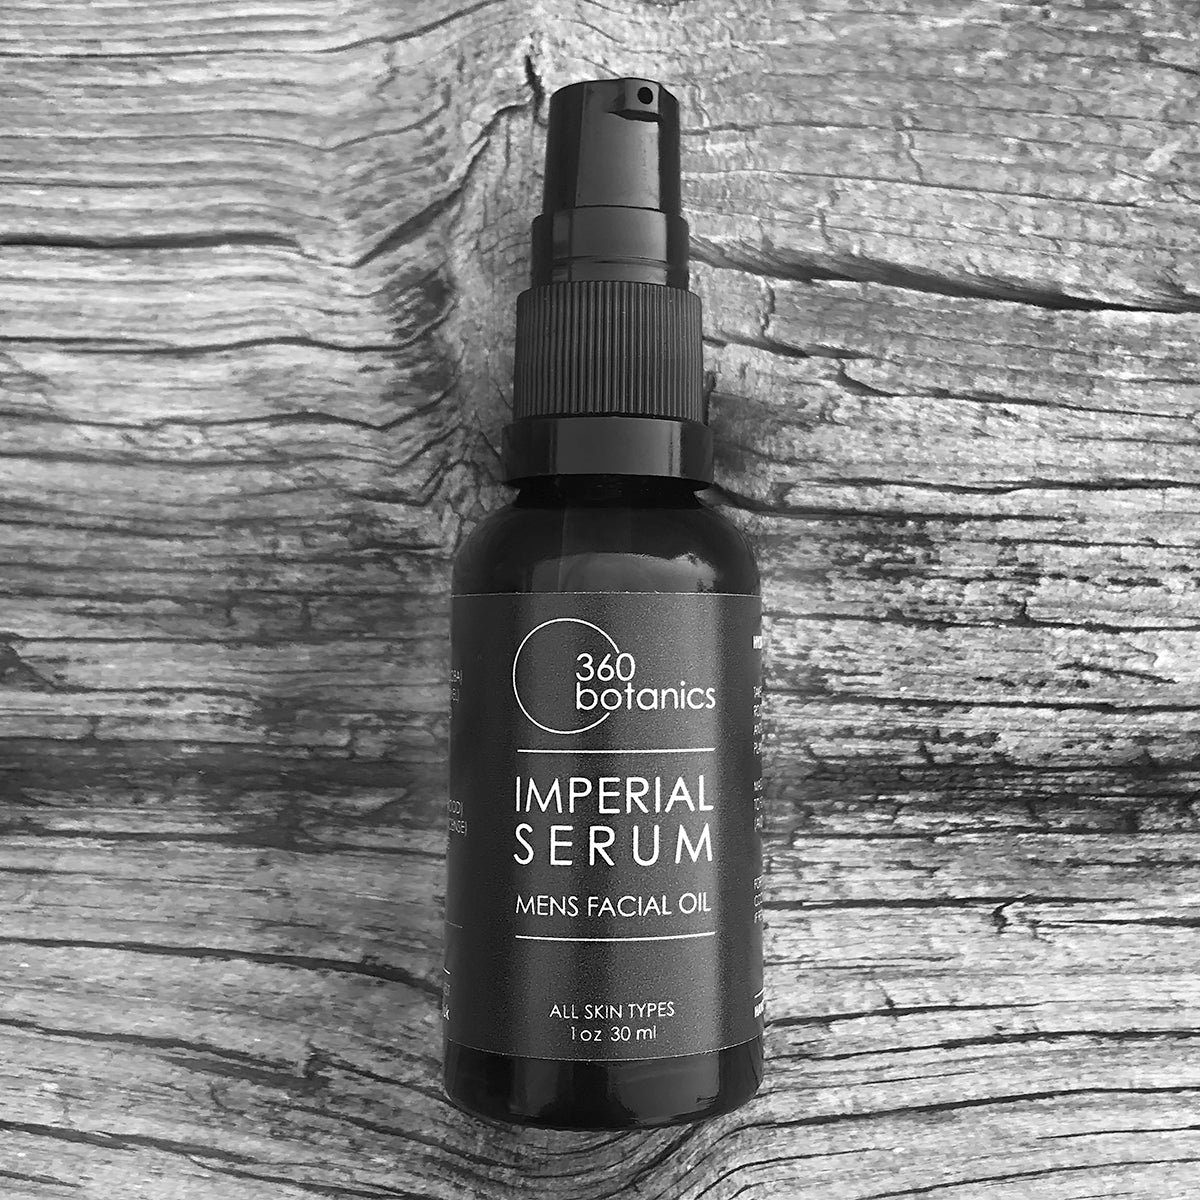 A bottle of 360 Botanics Imperial Serum men's facial oil on a rustic wooden background. The amber glass bottle has a black label and spray nozzle, and is presented in grayscale tones.